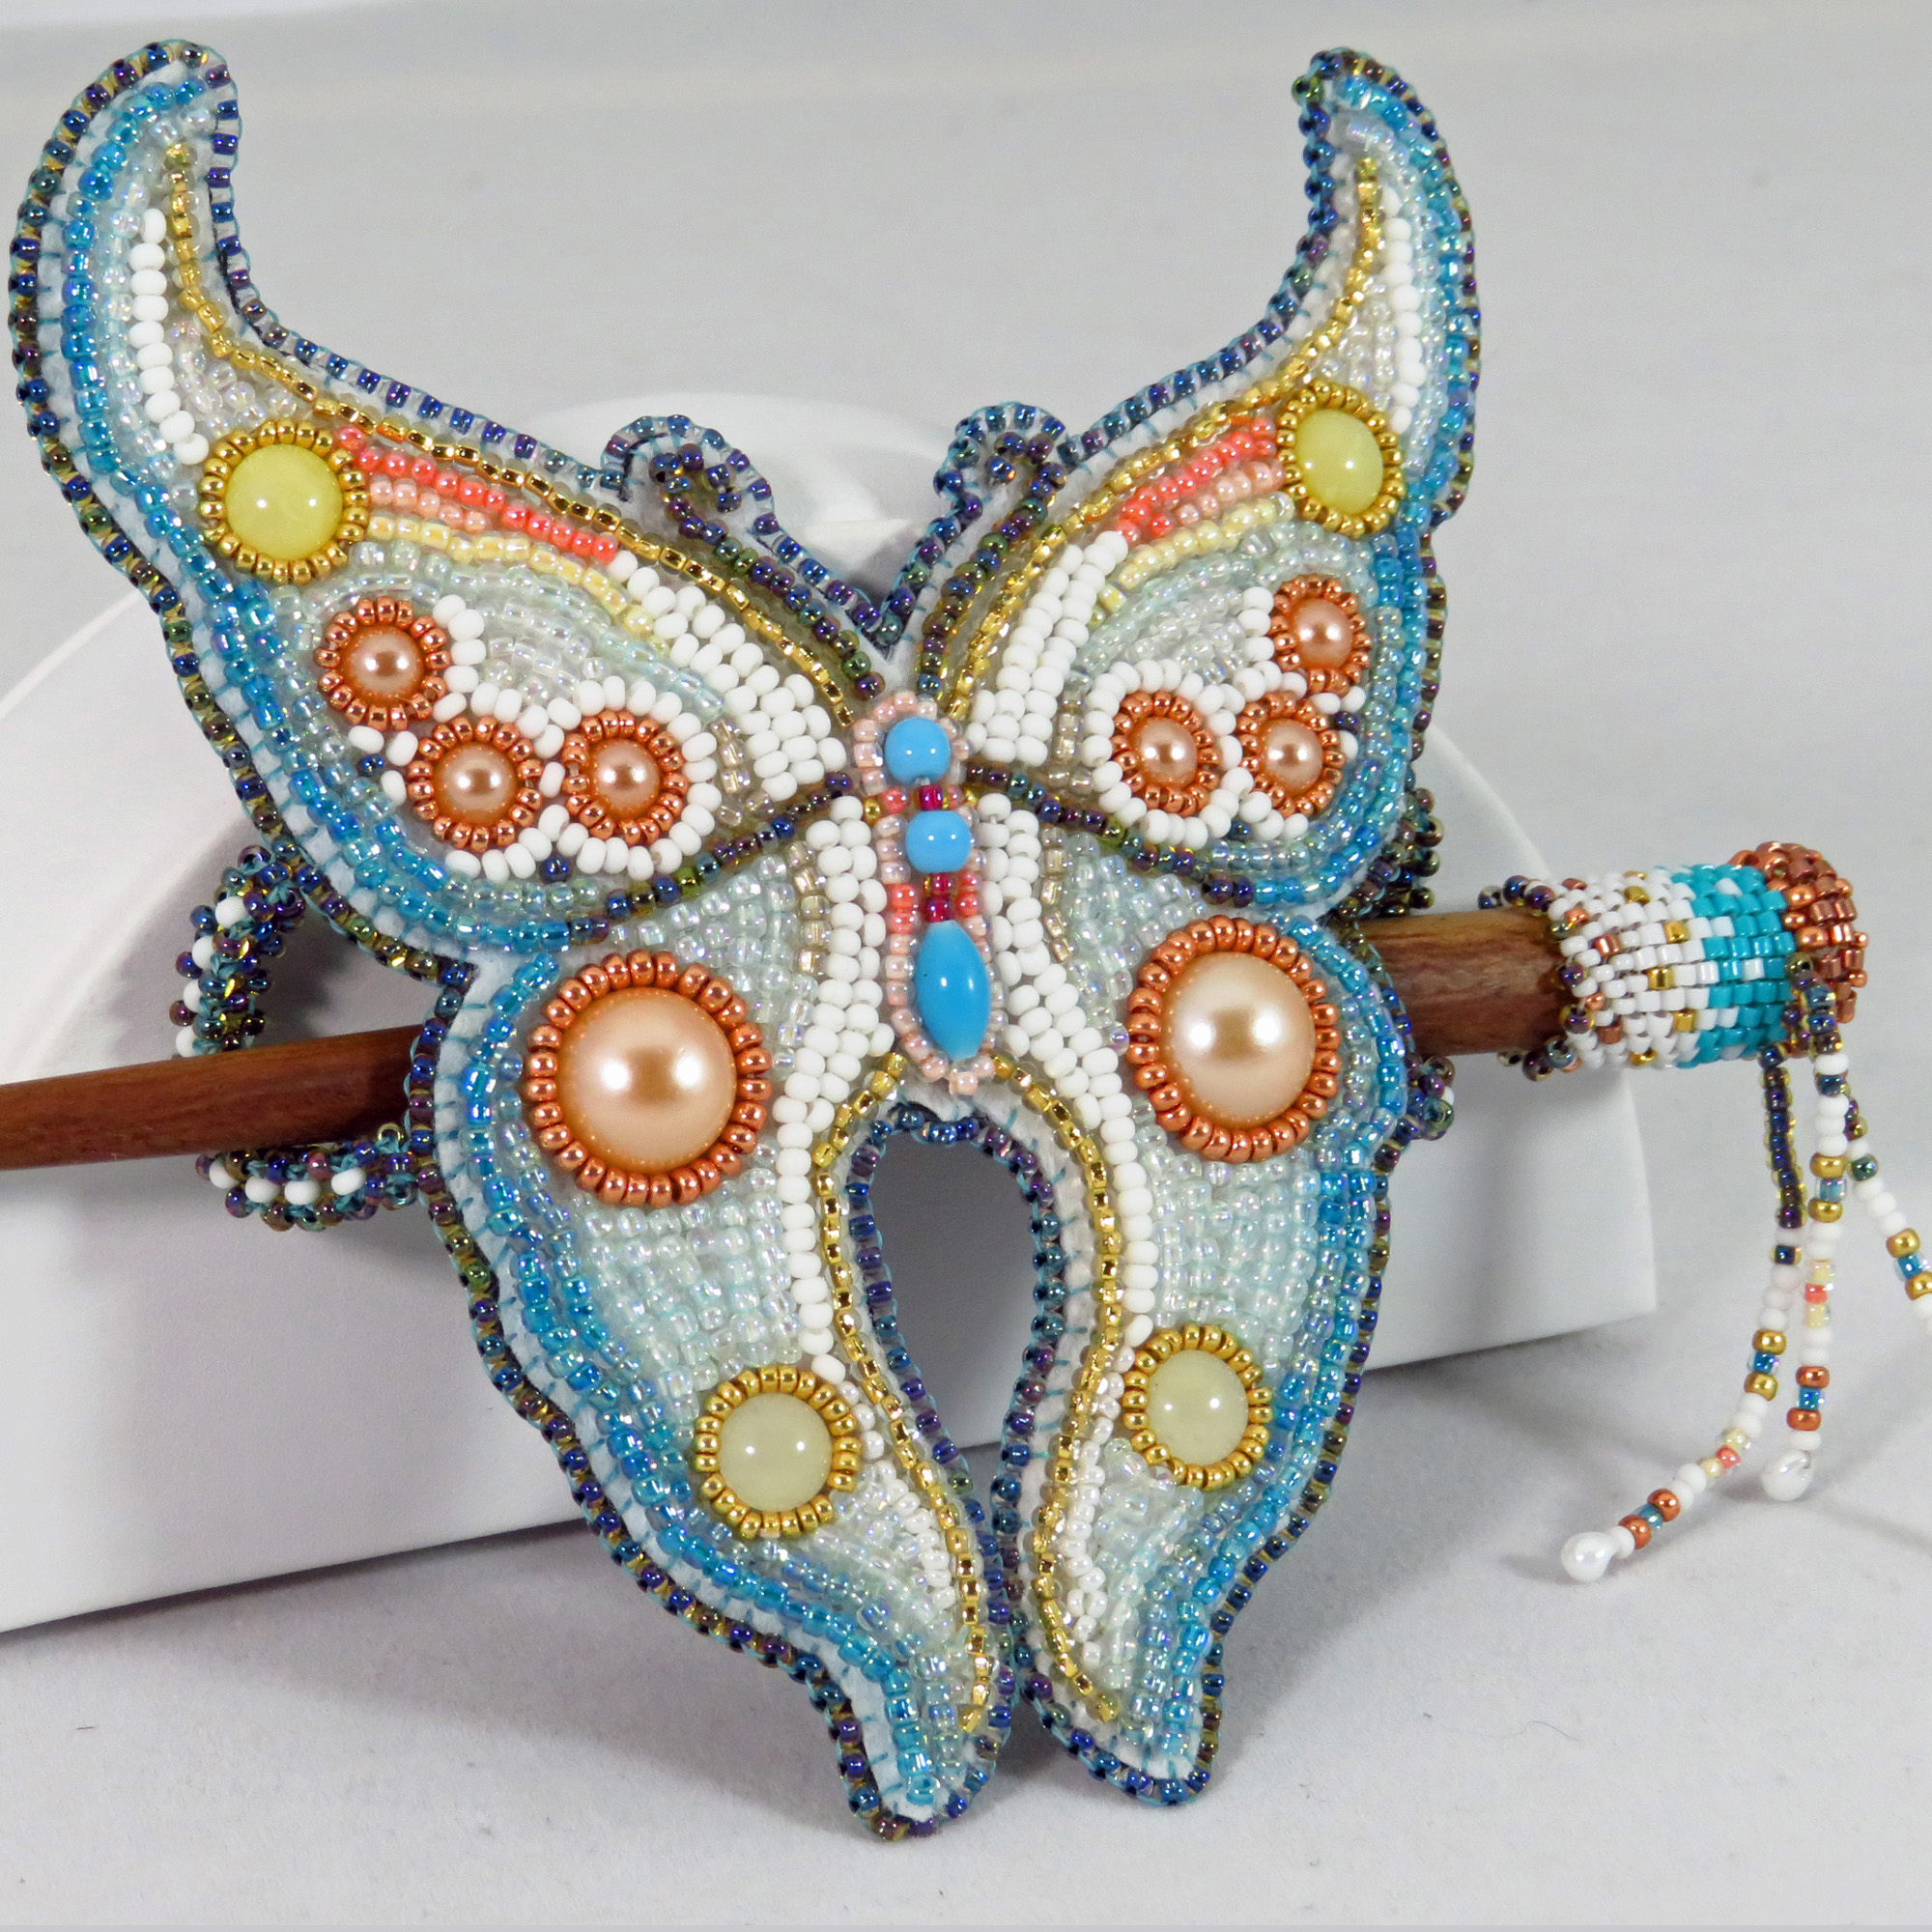 Art Nouveau bead embroidered Butterfly Barrette by Bonnie Van Hall